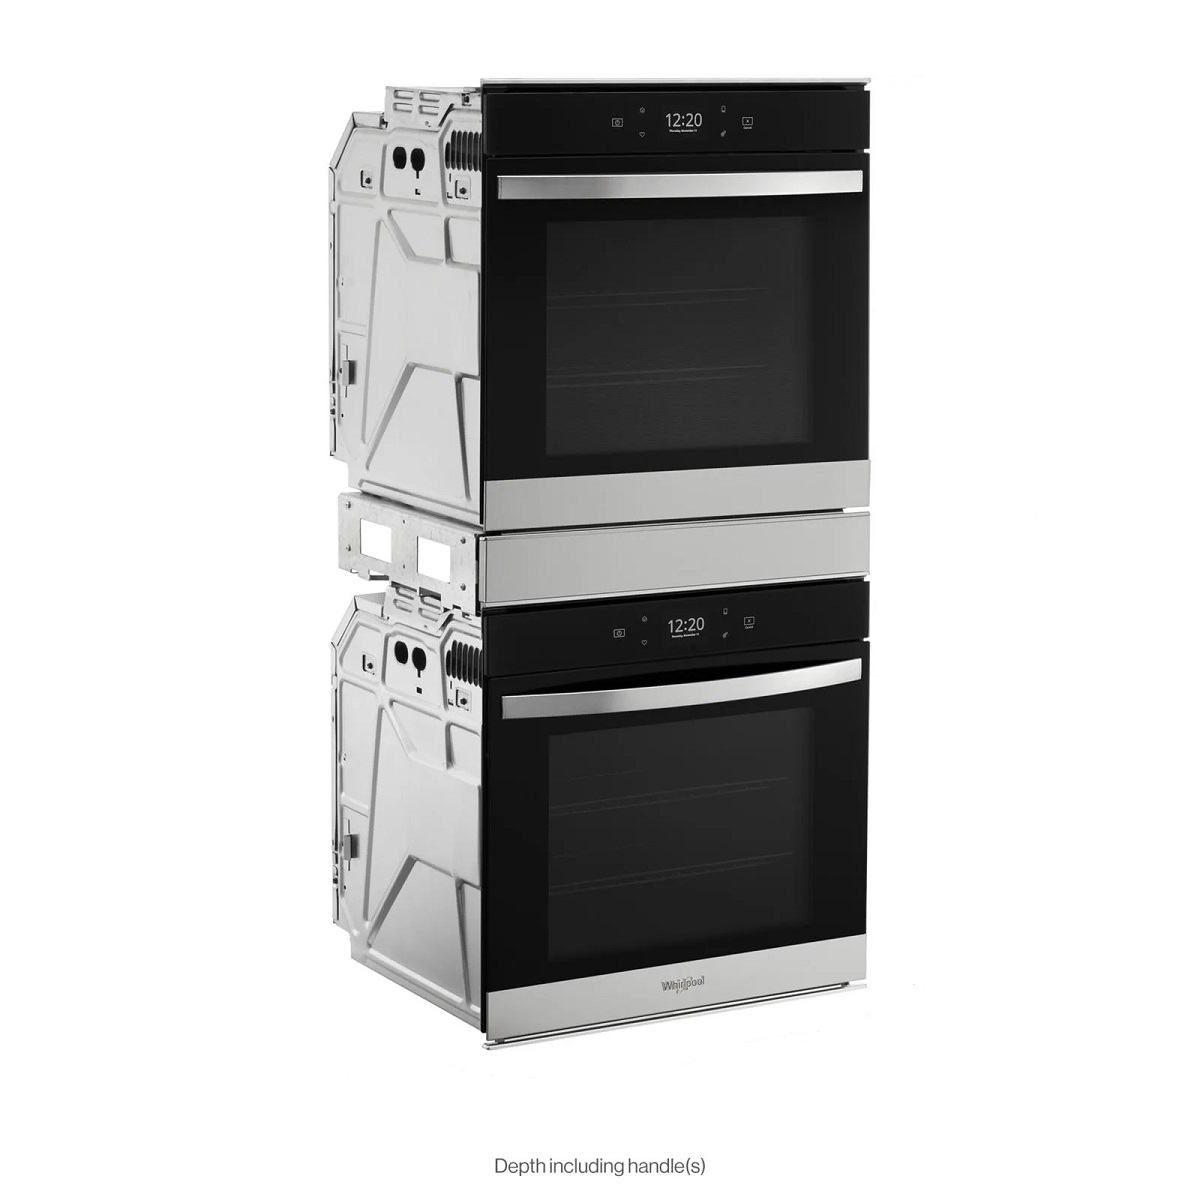 8 Best 24 Inch Stainless Steel Double Wall Ovens For 2023 1693213017 